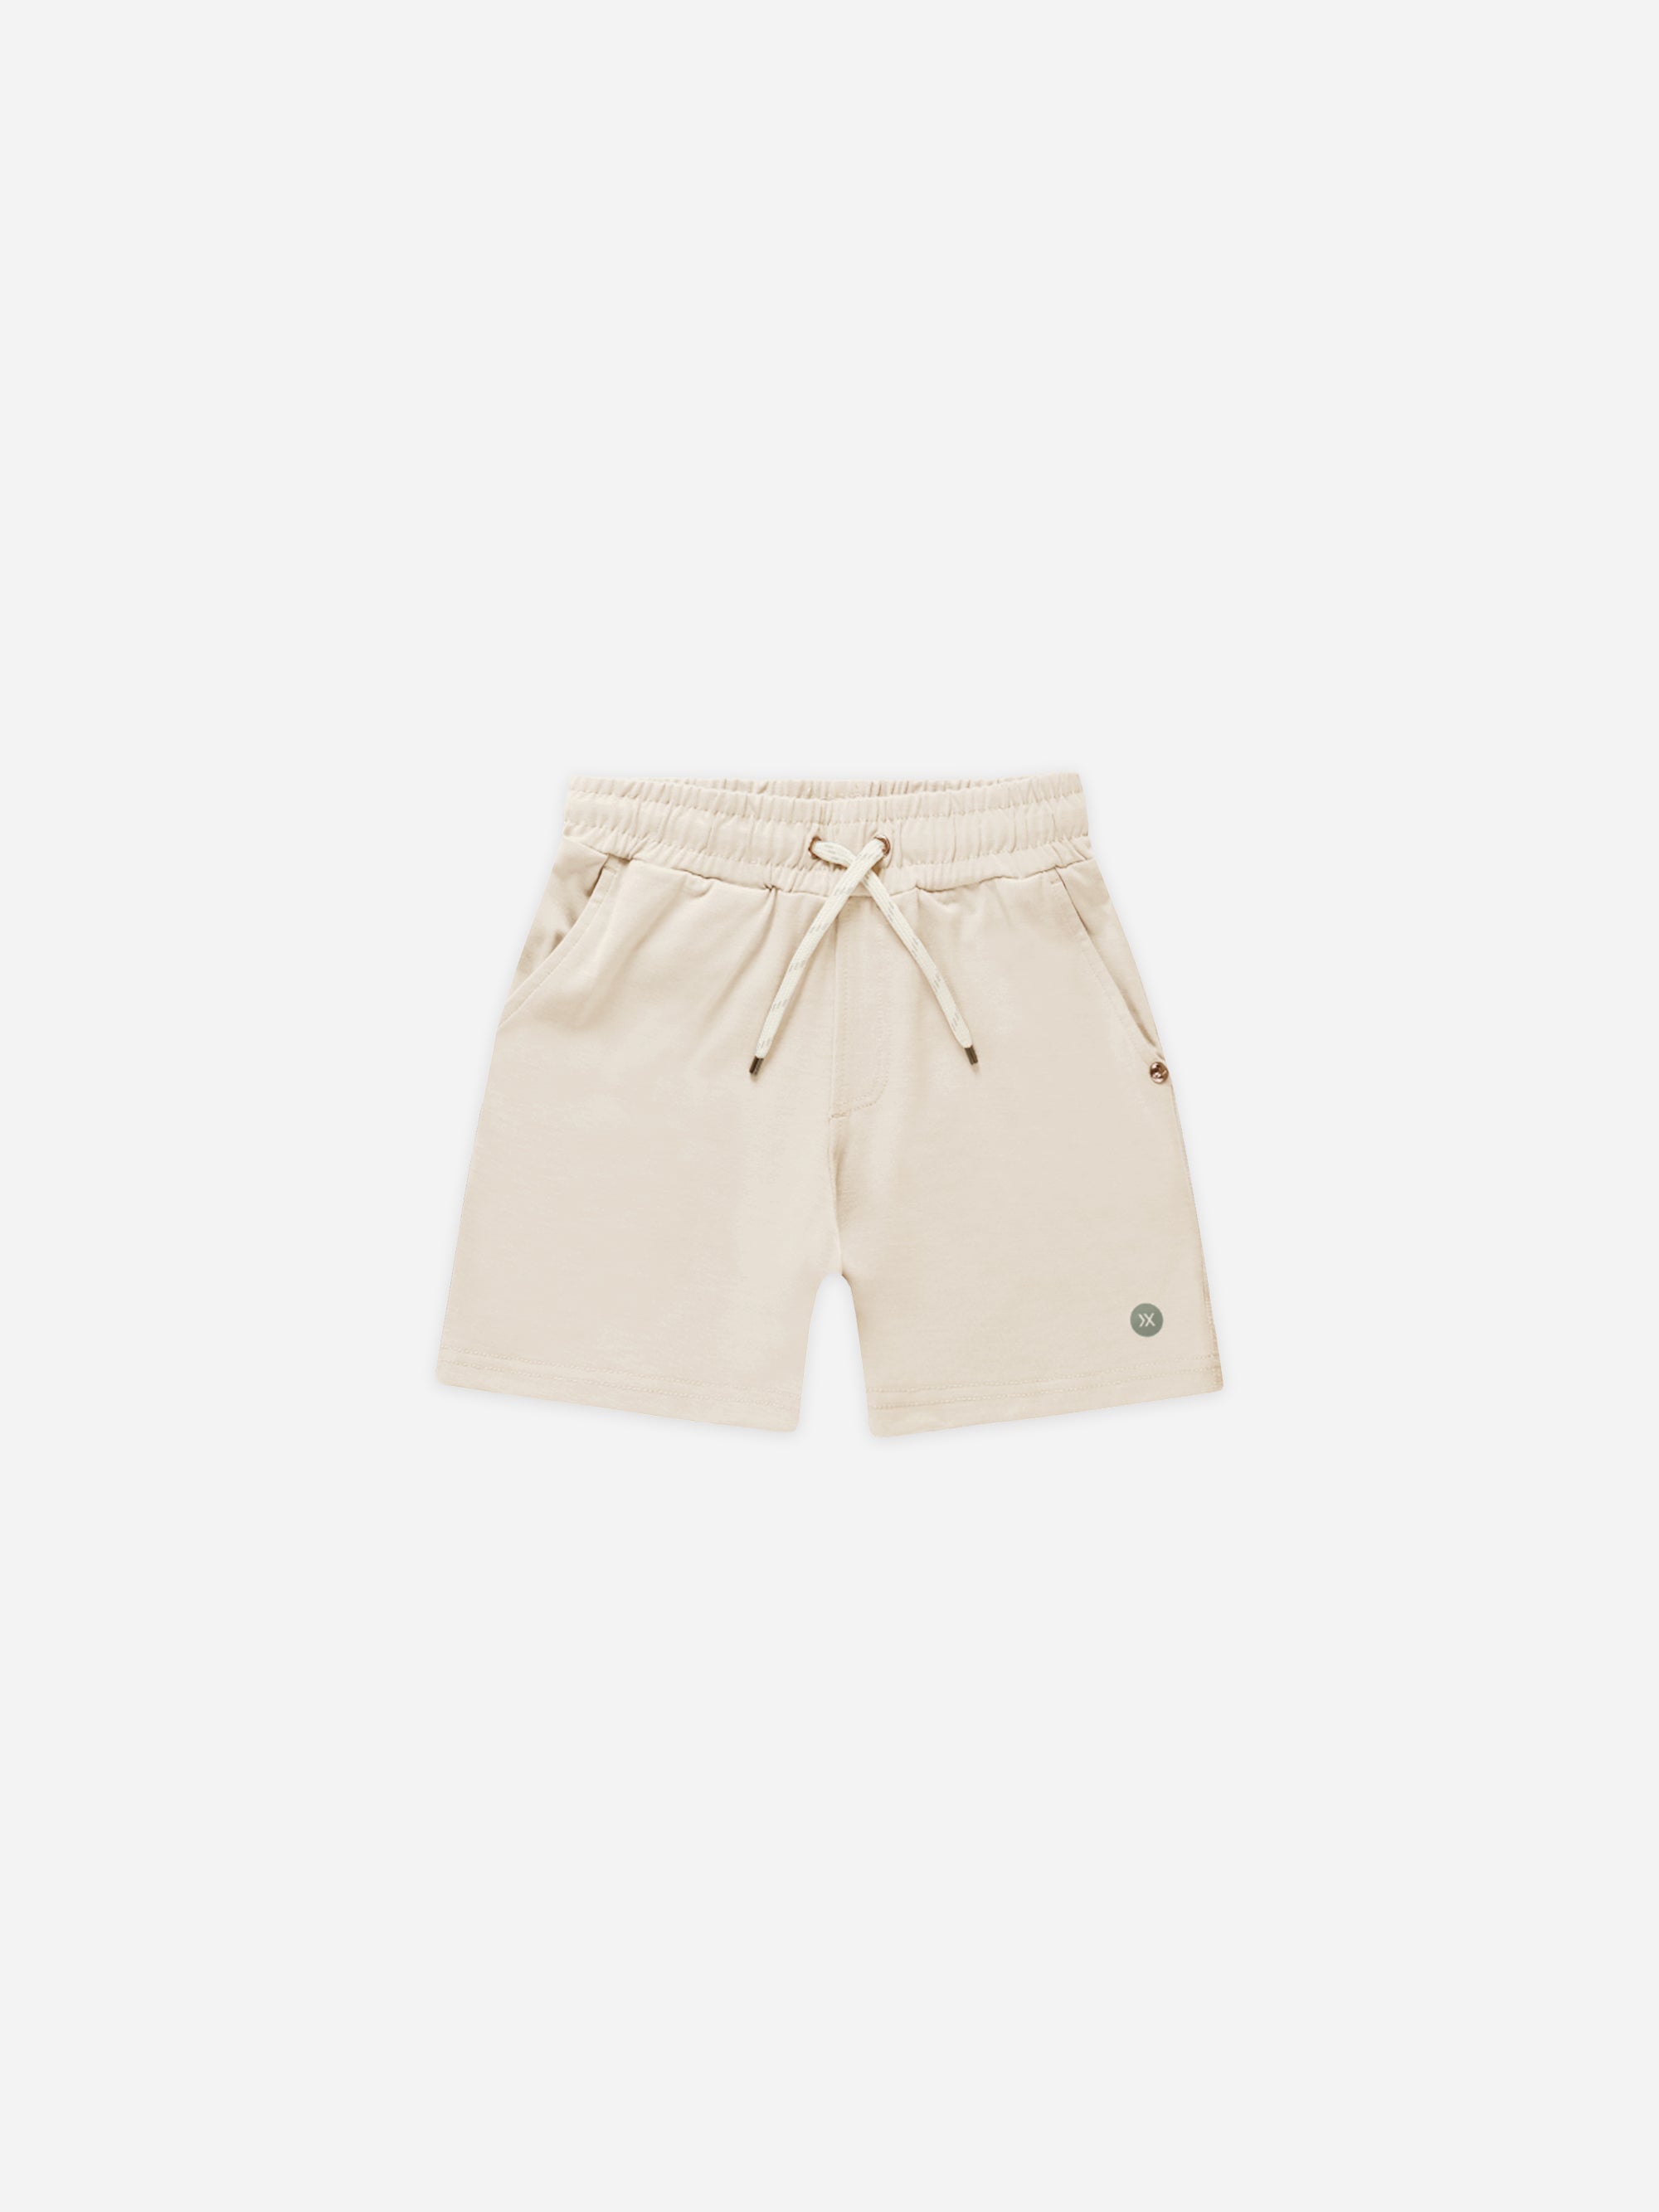 Oceanside Tech Short || Stone - Rylee + Cru | Kids Clothes | Trendy Baby Clothes | Modern Infant Outfits |